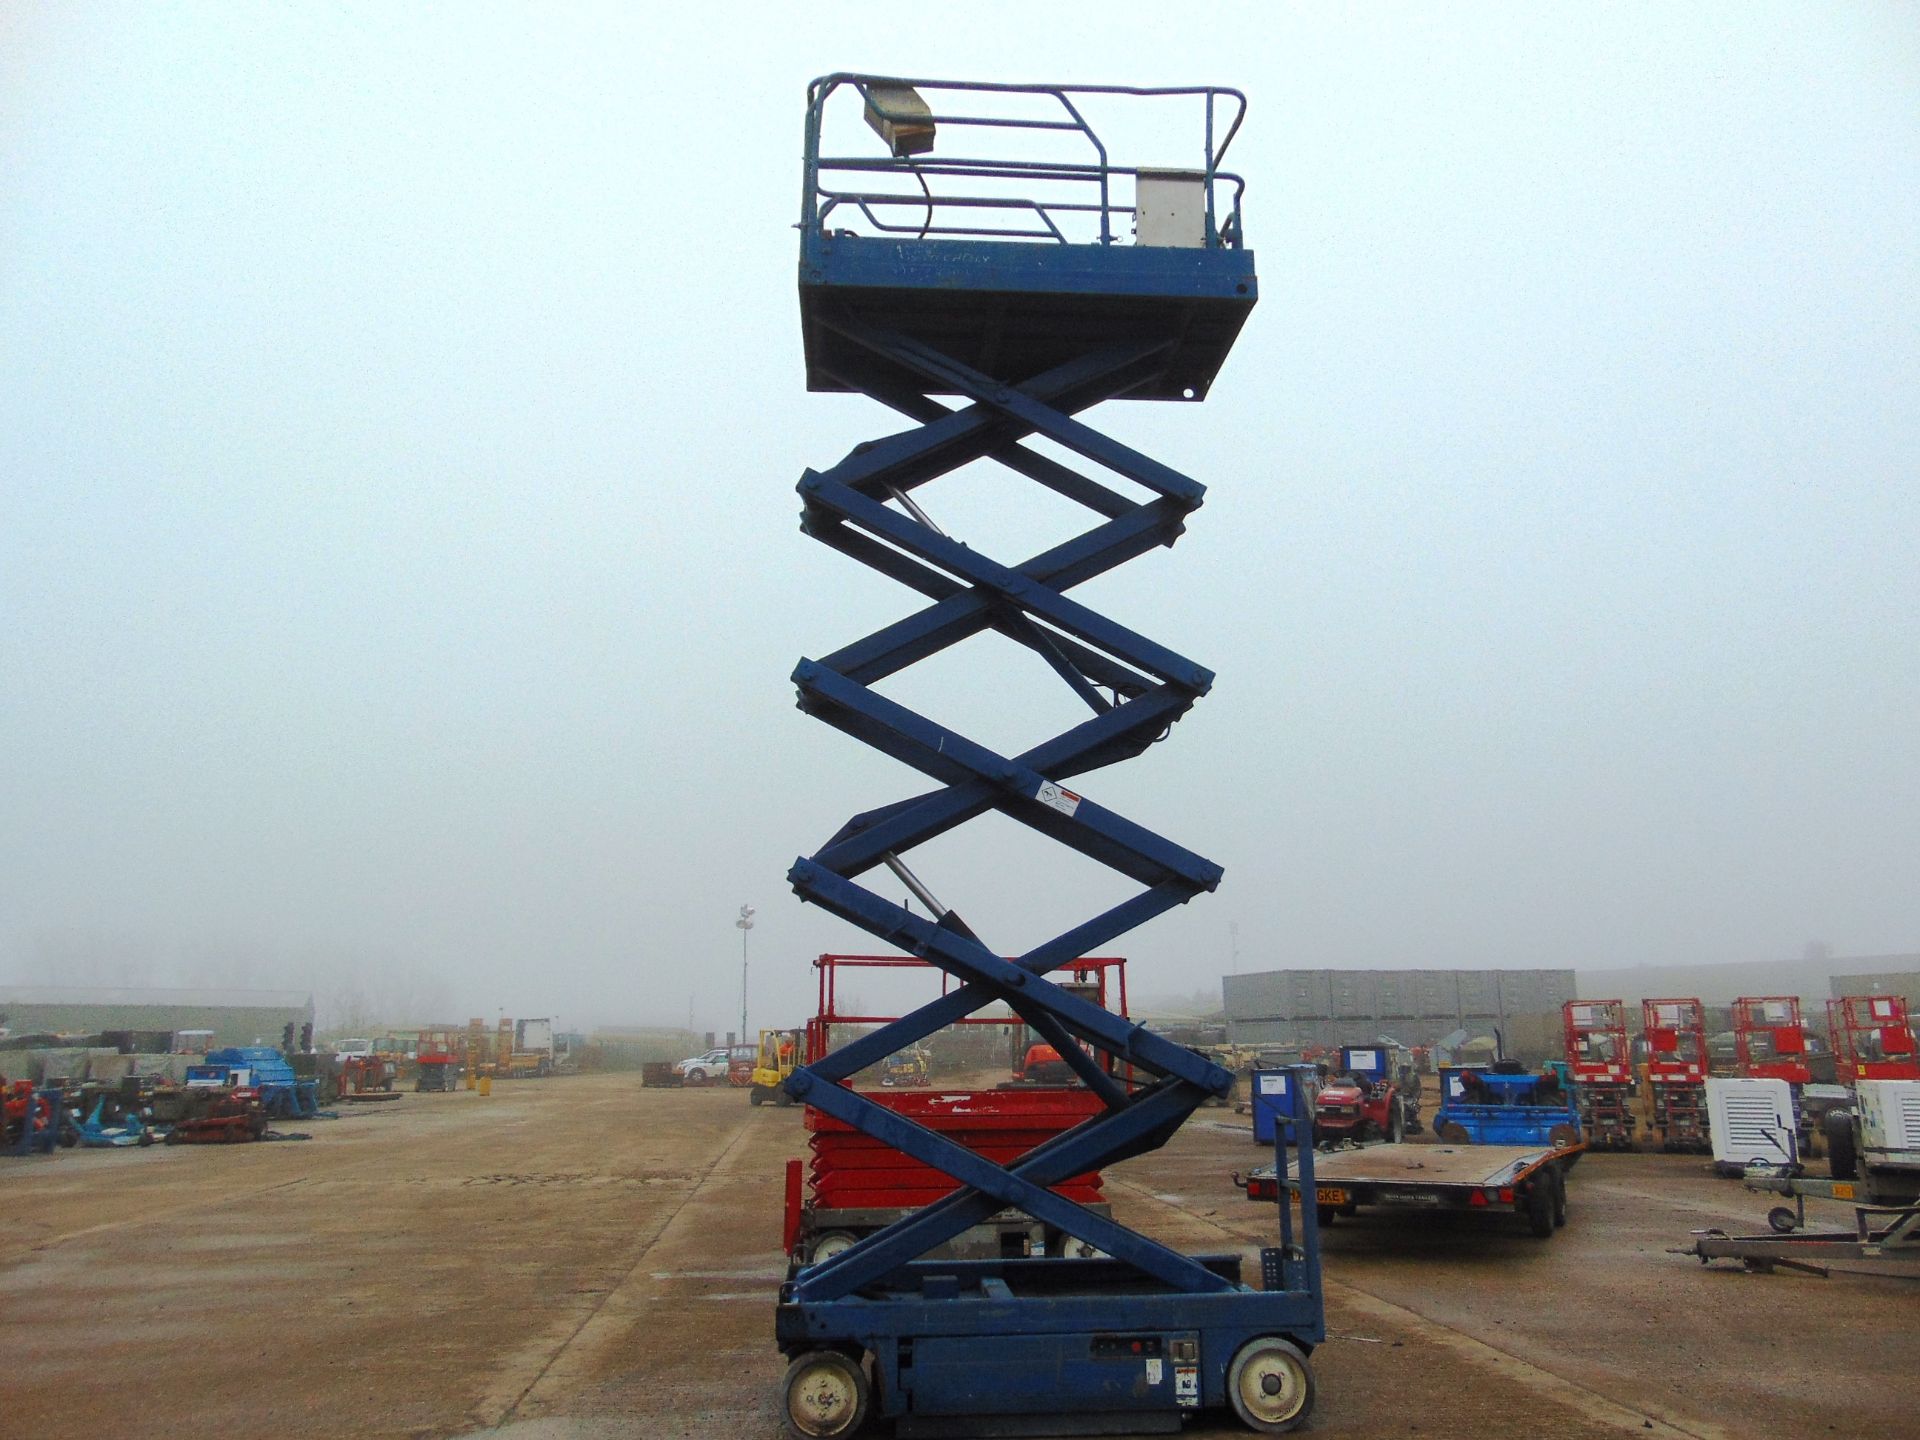 Powered Access Upright X32 11.8m Electric Scissor Lift ONLY 1,326 HOURS!